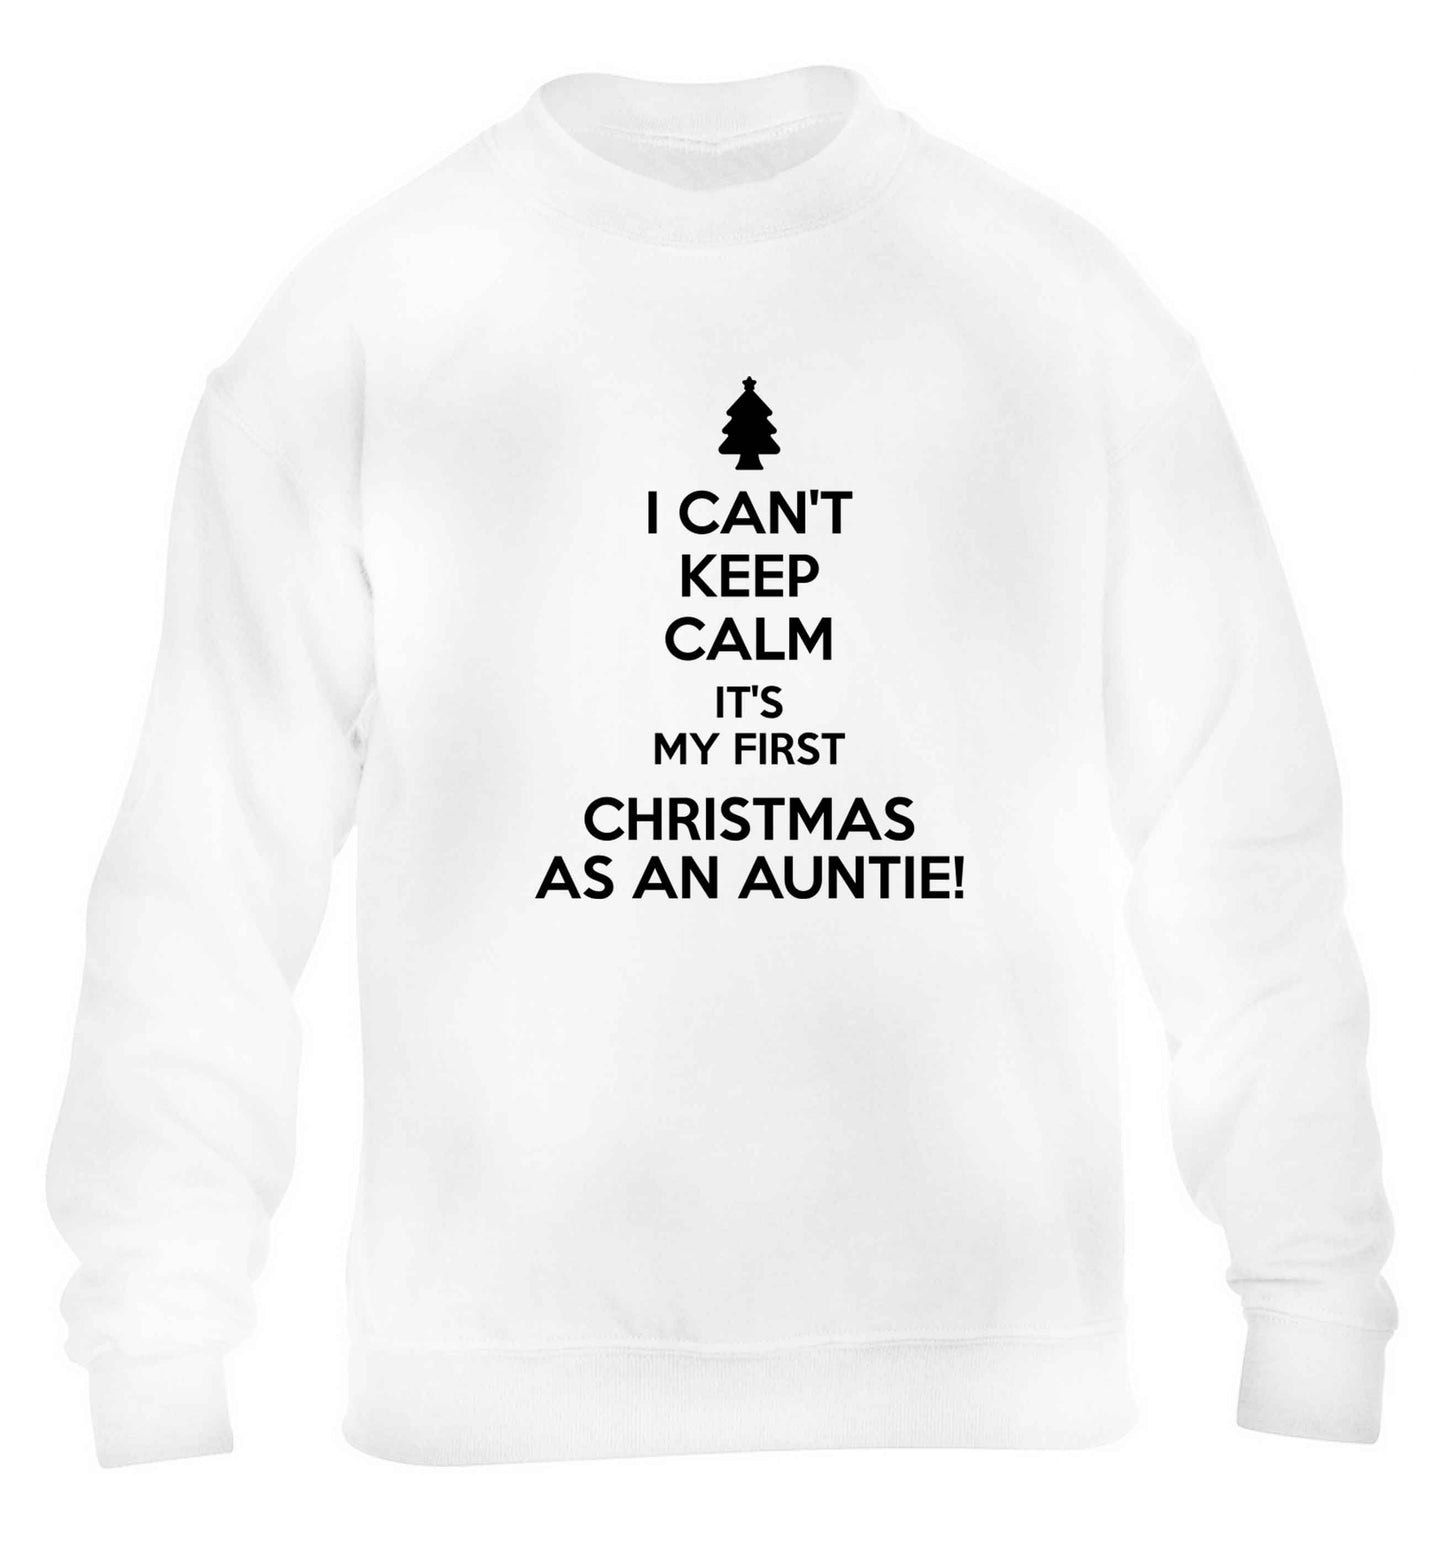 I can't keep calm it's my first Christmas as an auntie! children's white sweater 12-13 Years